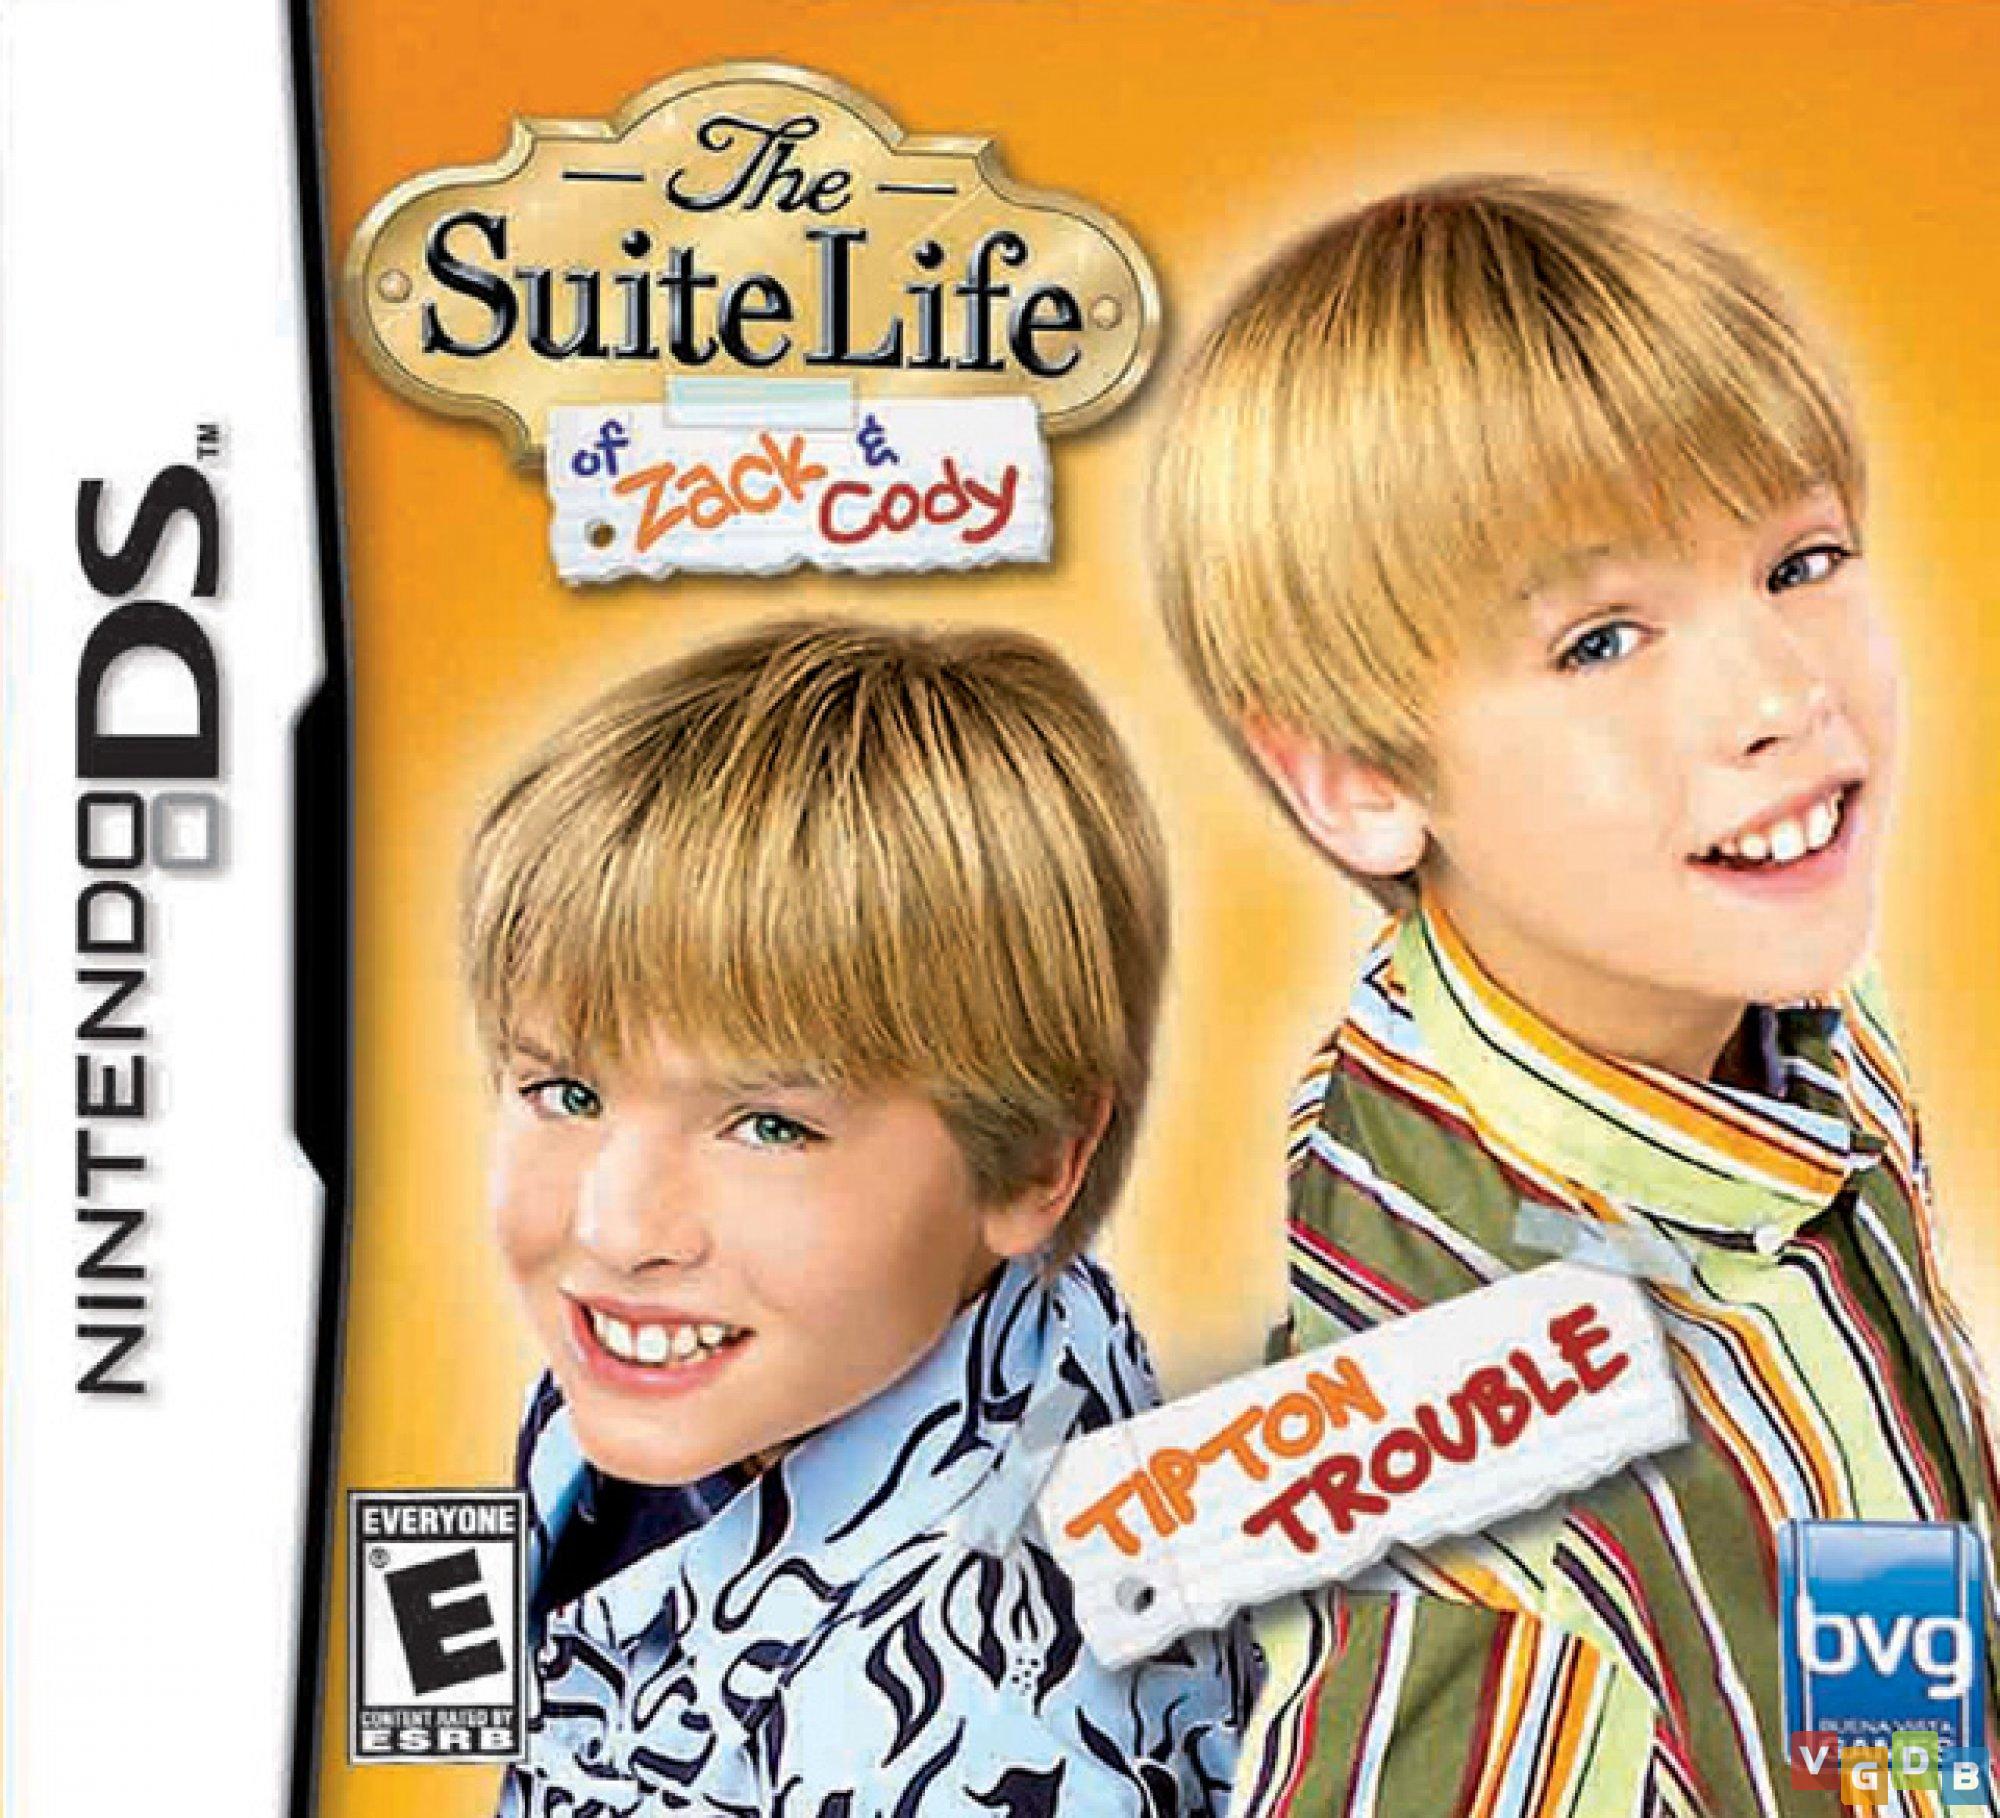 The Suite Life of Zack Cody Tipton Trouble VGDB Vídeo Game Data Base